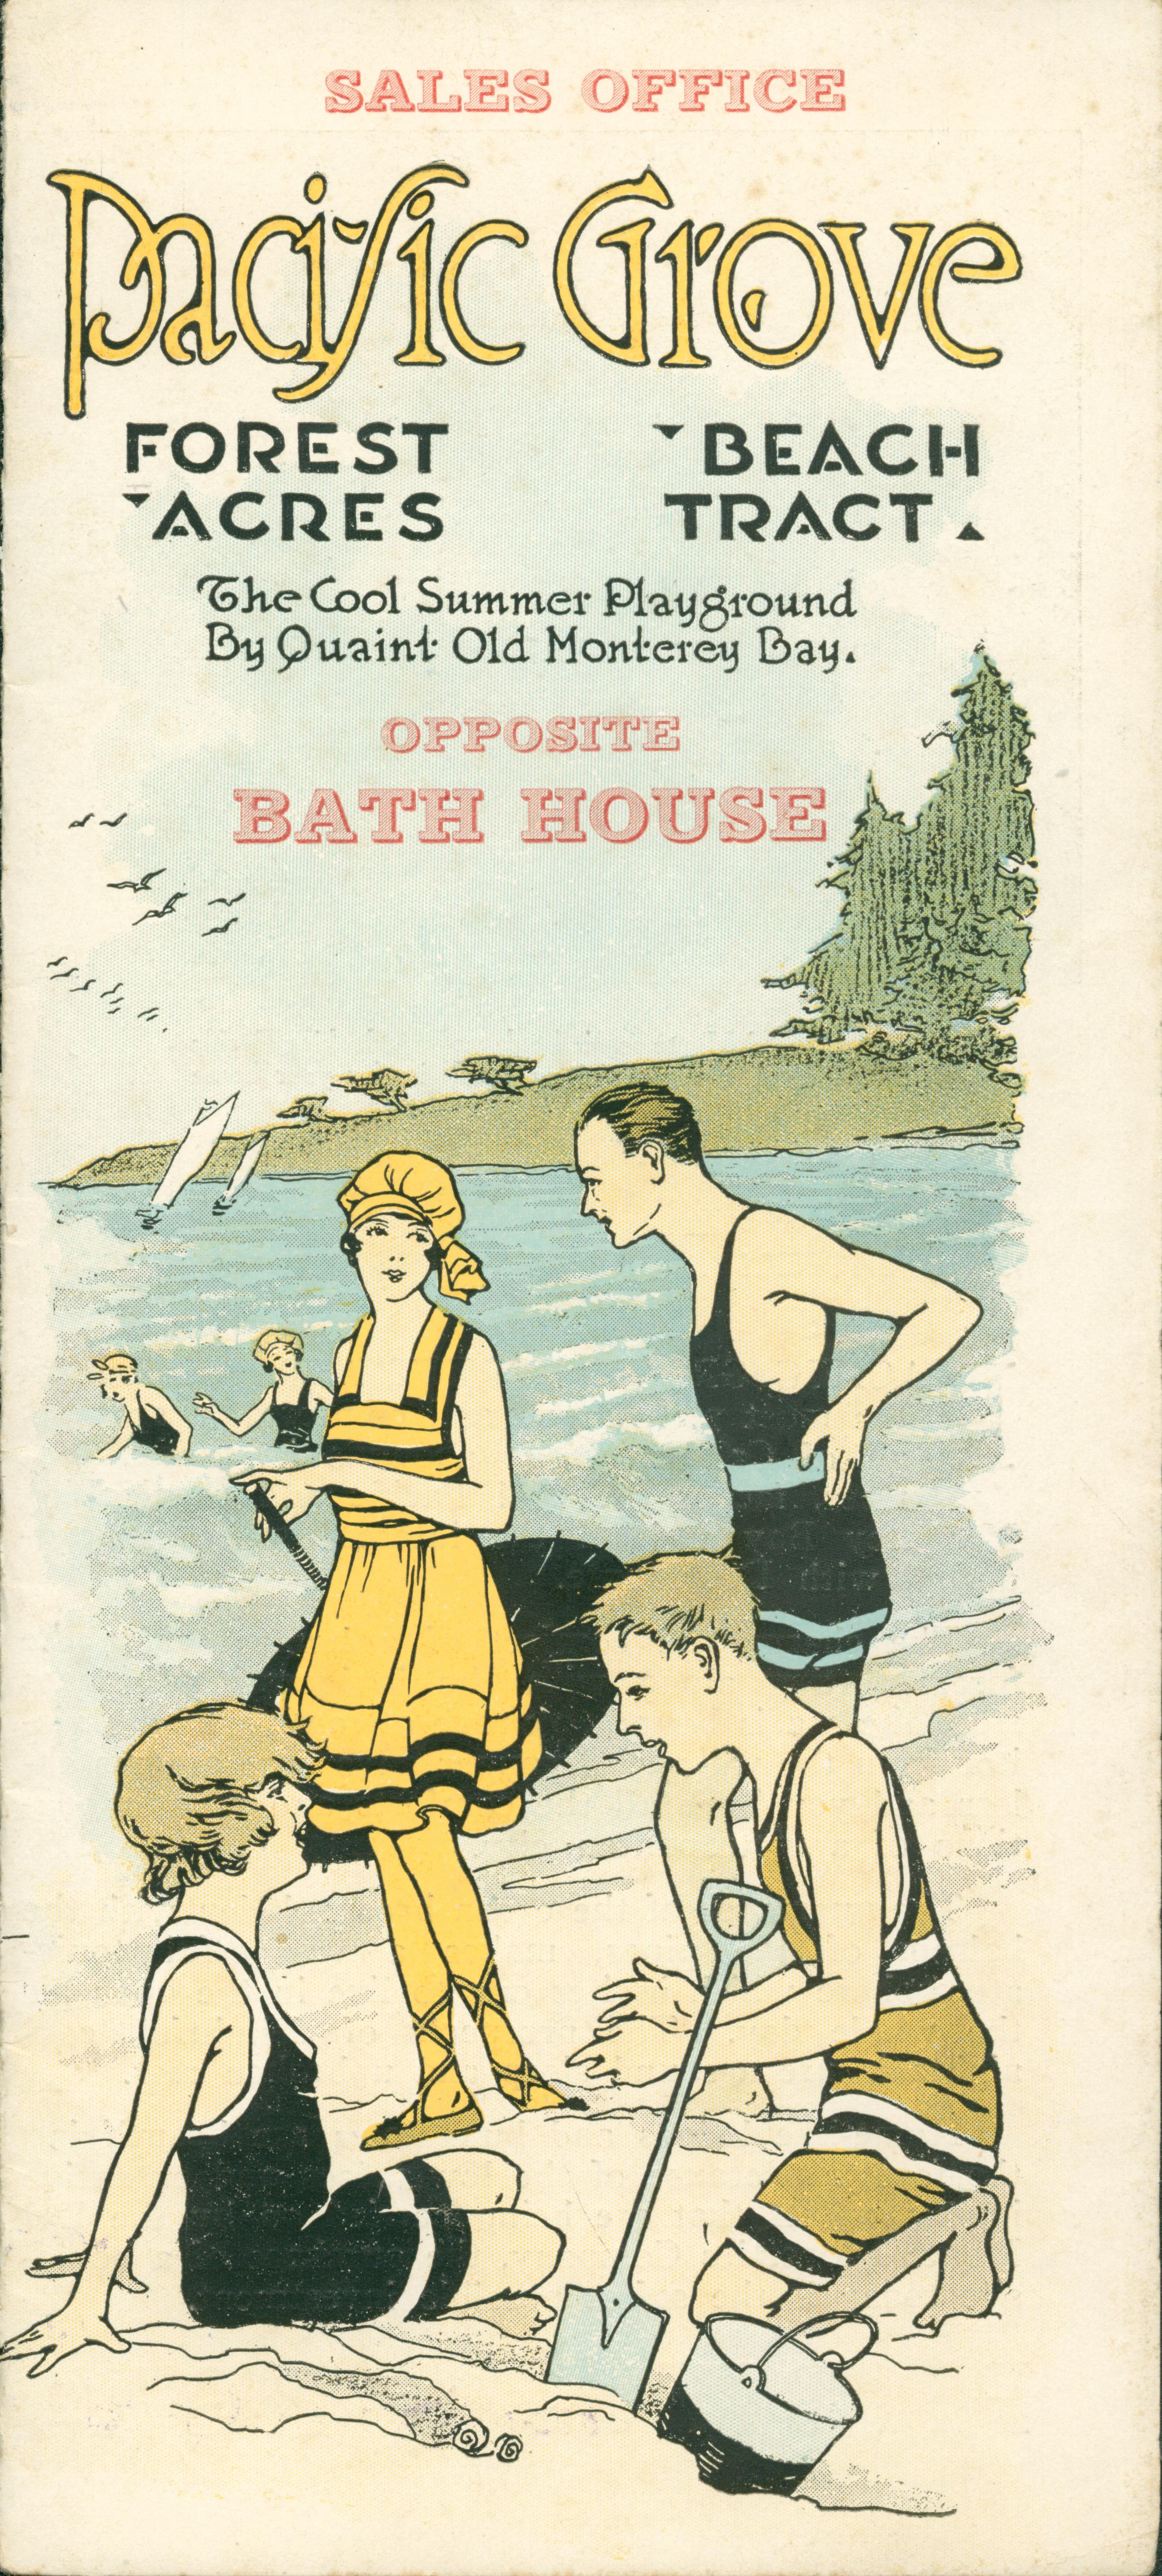 The front of this brochure shows a quartette of individuals on the beach with sailboats and two swimmers behind them.